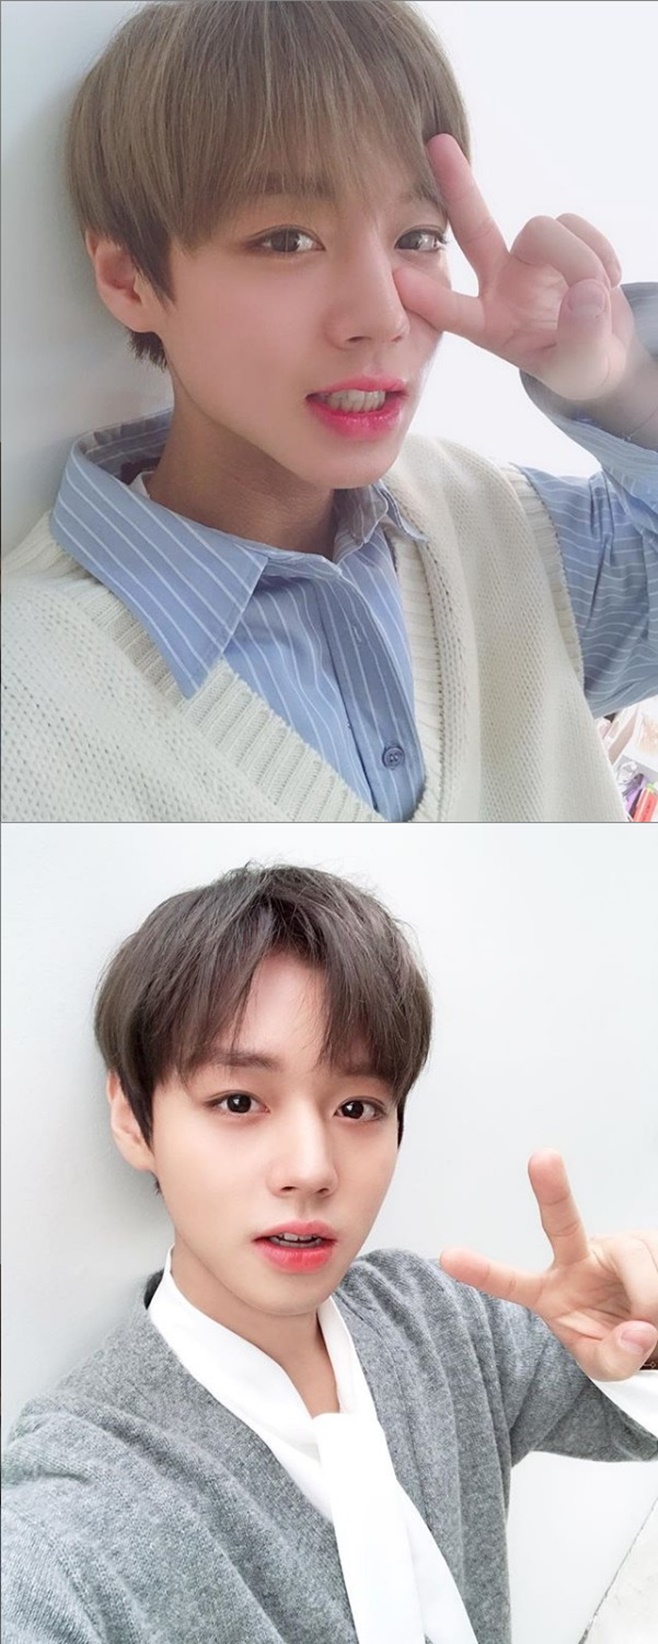 Park Jihoons Instagram followers, who started standing alone in the group Wanna One, have surpassed 500,000.Park Jihoon opened his official Instagram on the afternoon of the 10th; he posted a short video of himself at the time of opening, attracting fans attention.Park Jihoons Instagram is gathering attention with 520,000 followers as of 8 pm on the 10th, which is 9 hours old.On the last two days, Kang Daniel and Yoon Ji-sung, who were Wanna One members, opened an Instagram and attracted attention.Kang Daniel currently has 1.8 million followers and Yoon Ji-sung also has 1 million followers, proving Wanna Ones extraordinary popularity.Wanna One, which Park Jihoon belongs to, will finish the activity with the last concert at the Gocheok Sky Dome in Seoul from the 24th.